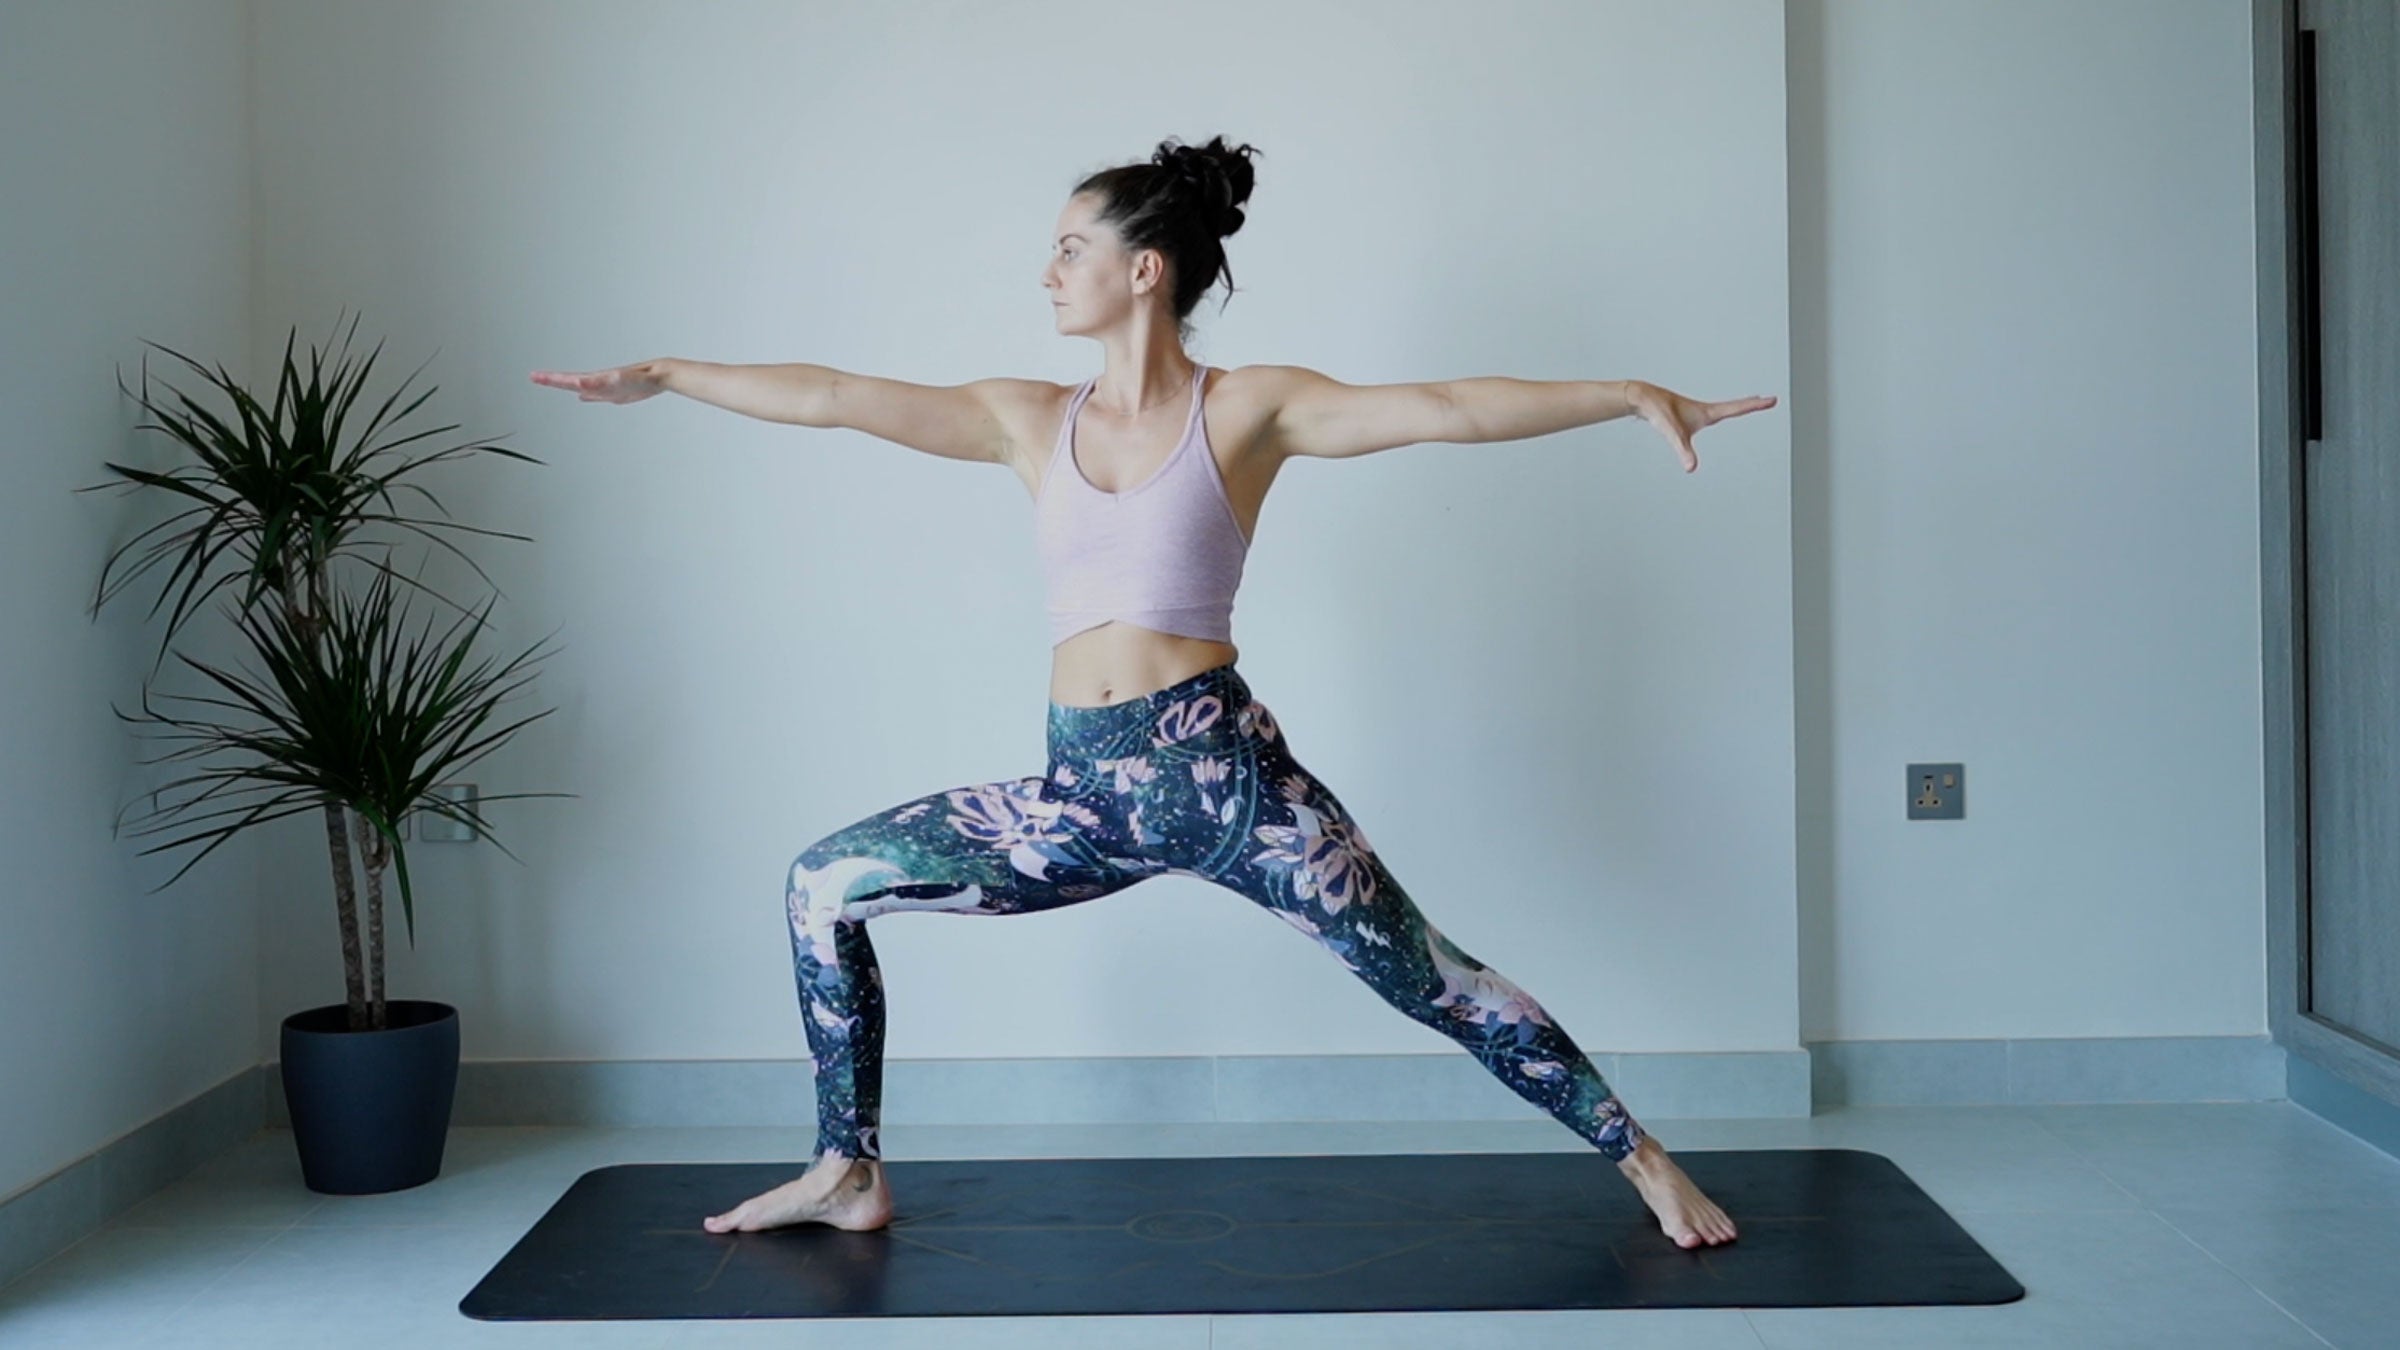 How to use a yoga wedge in your practice - uses for wrist pain, squats &  more -Di Hickman